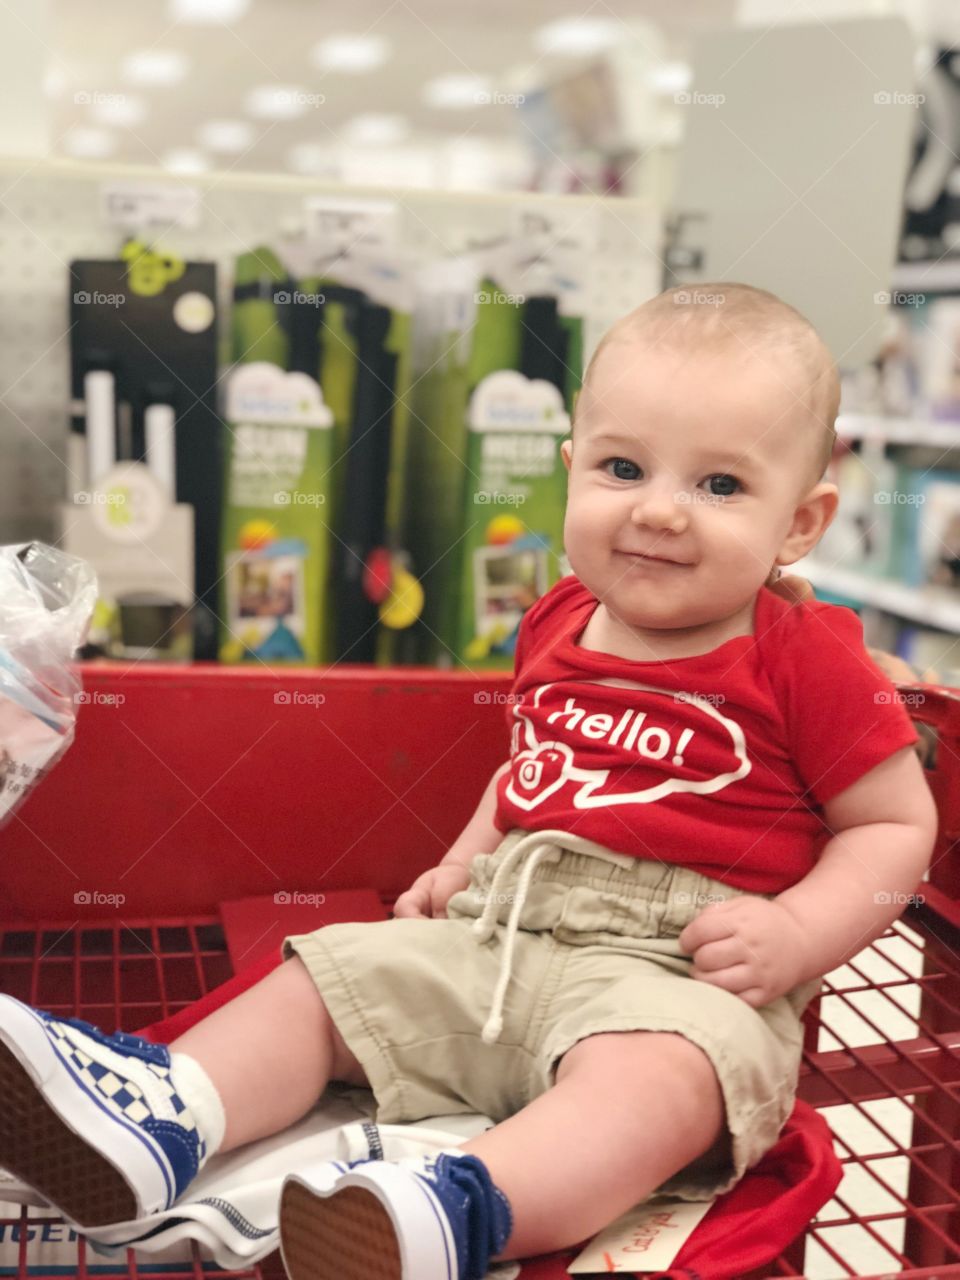 Target workers getting younger and younger. 